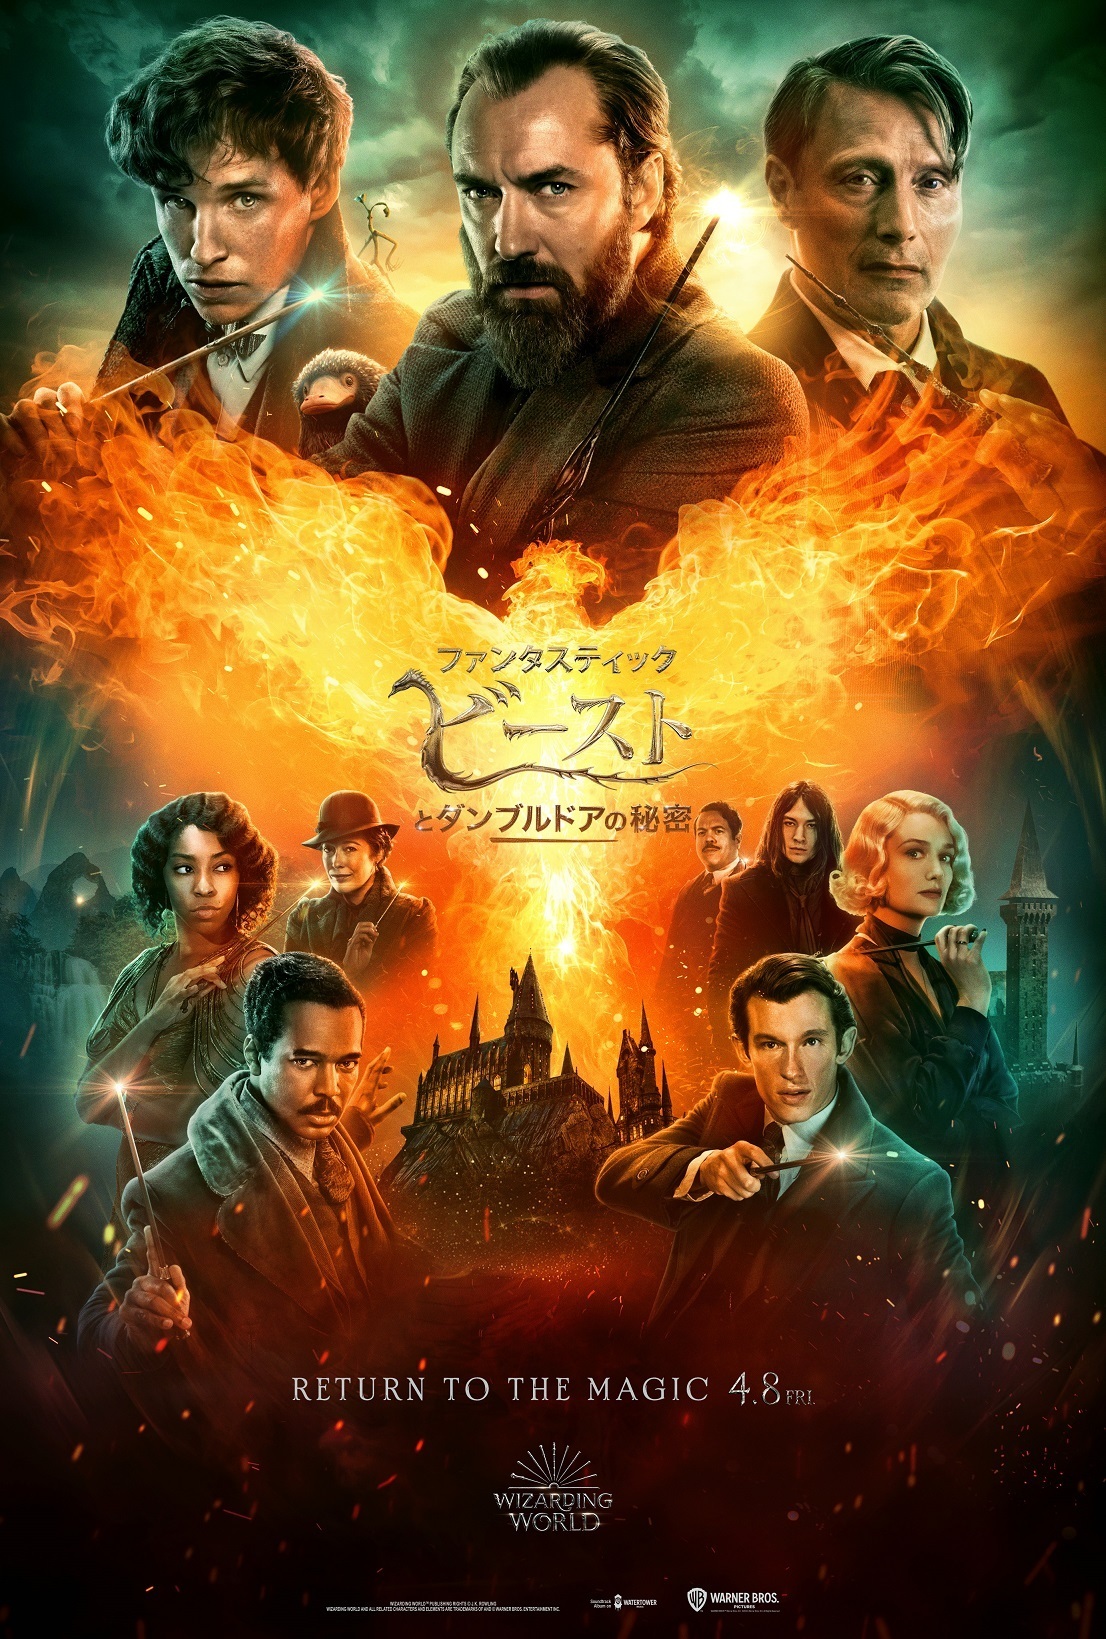 （C）2021 Warner Bros. Ent. All Rights Reserved Wizarding World TM Publishing Rights  （C）J.K. Rowling WIZARDING WORLD and all related characters and elements are trademarks of and（C）Warner Bros. Entertainment Inc.